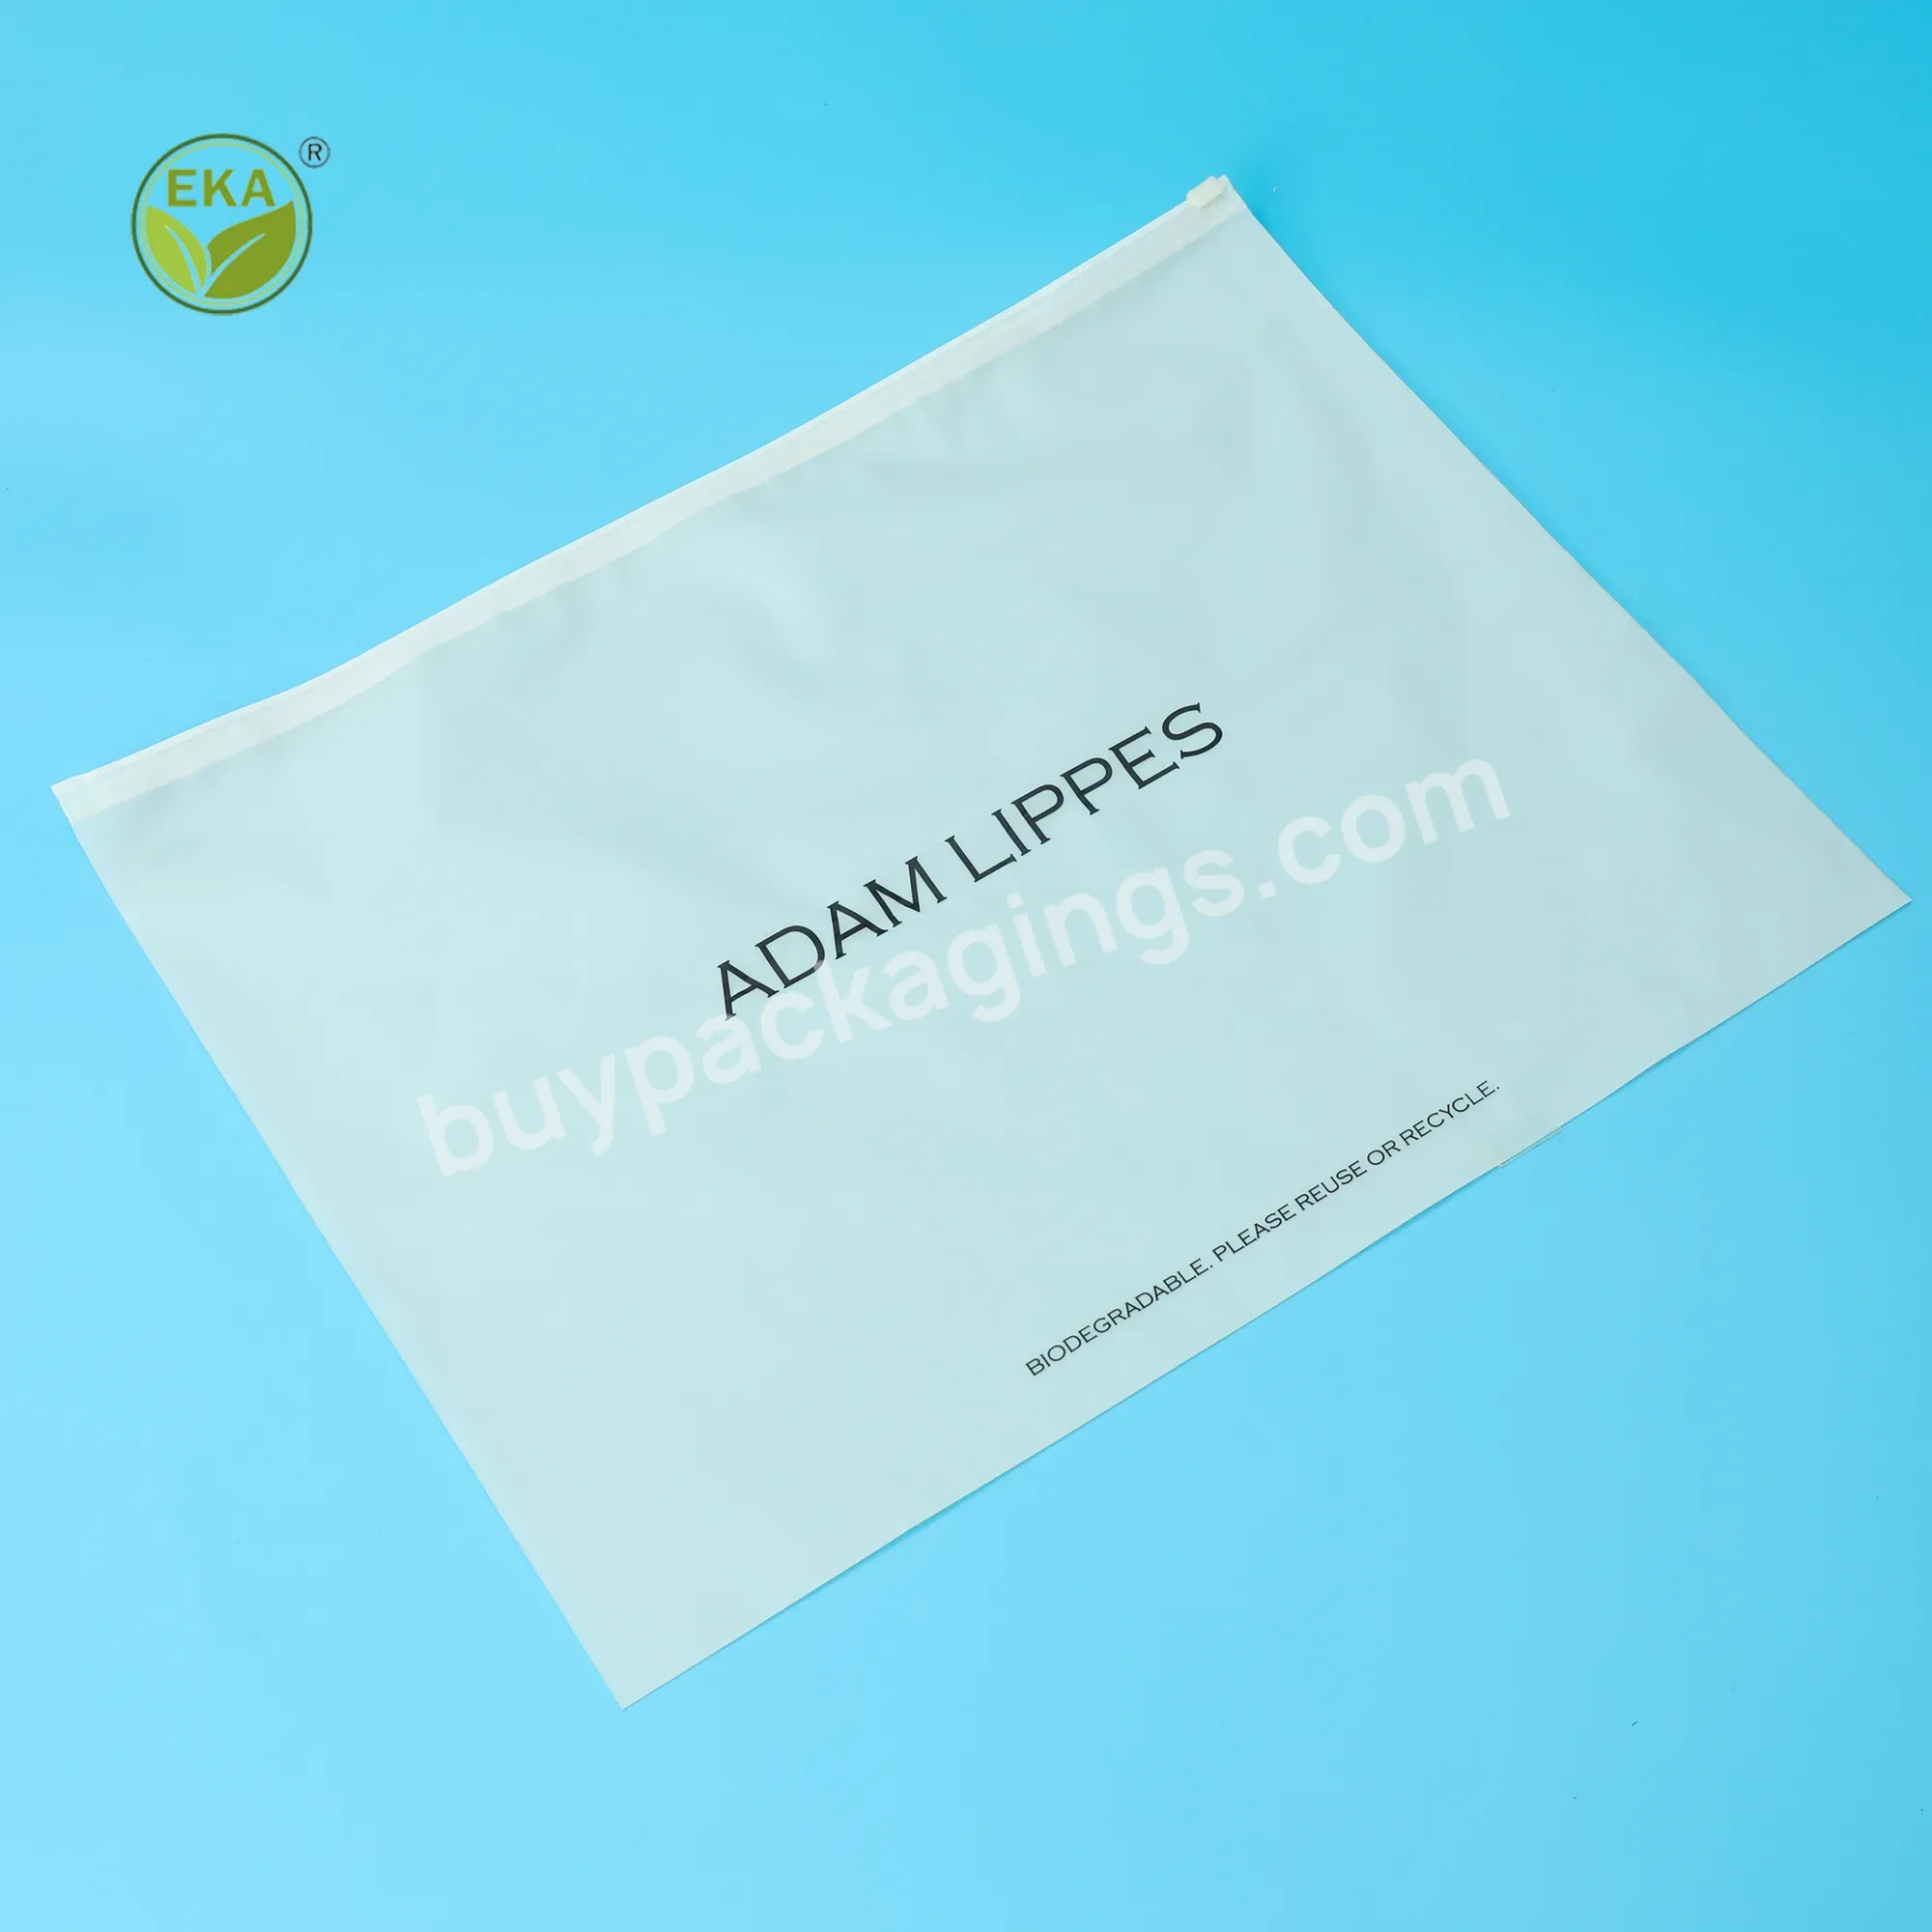 Eka 100% Pla Biodegradable Cornstarch Garment Bag Sustainable Packaging Clothes With Custom Printed Logo - Buy Corn Starch Bags Zipper Bags For Clothing Packaging,100% Biodegradable Sustainable Packaging Bags,Frosted Zipper Bag For Clothing.